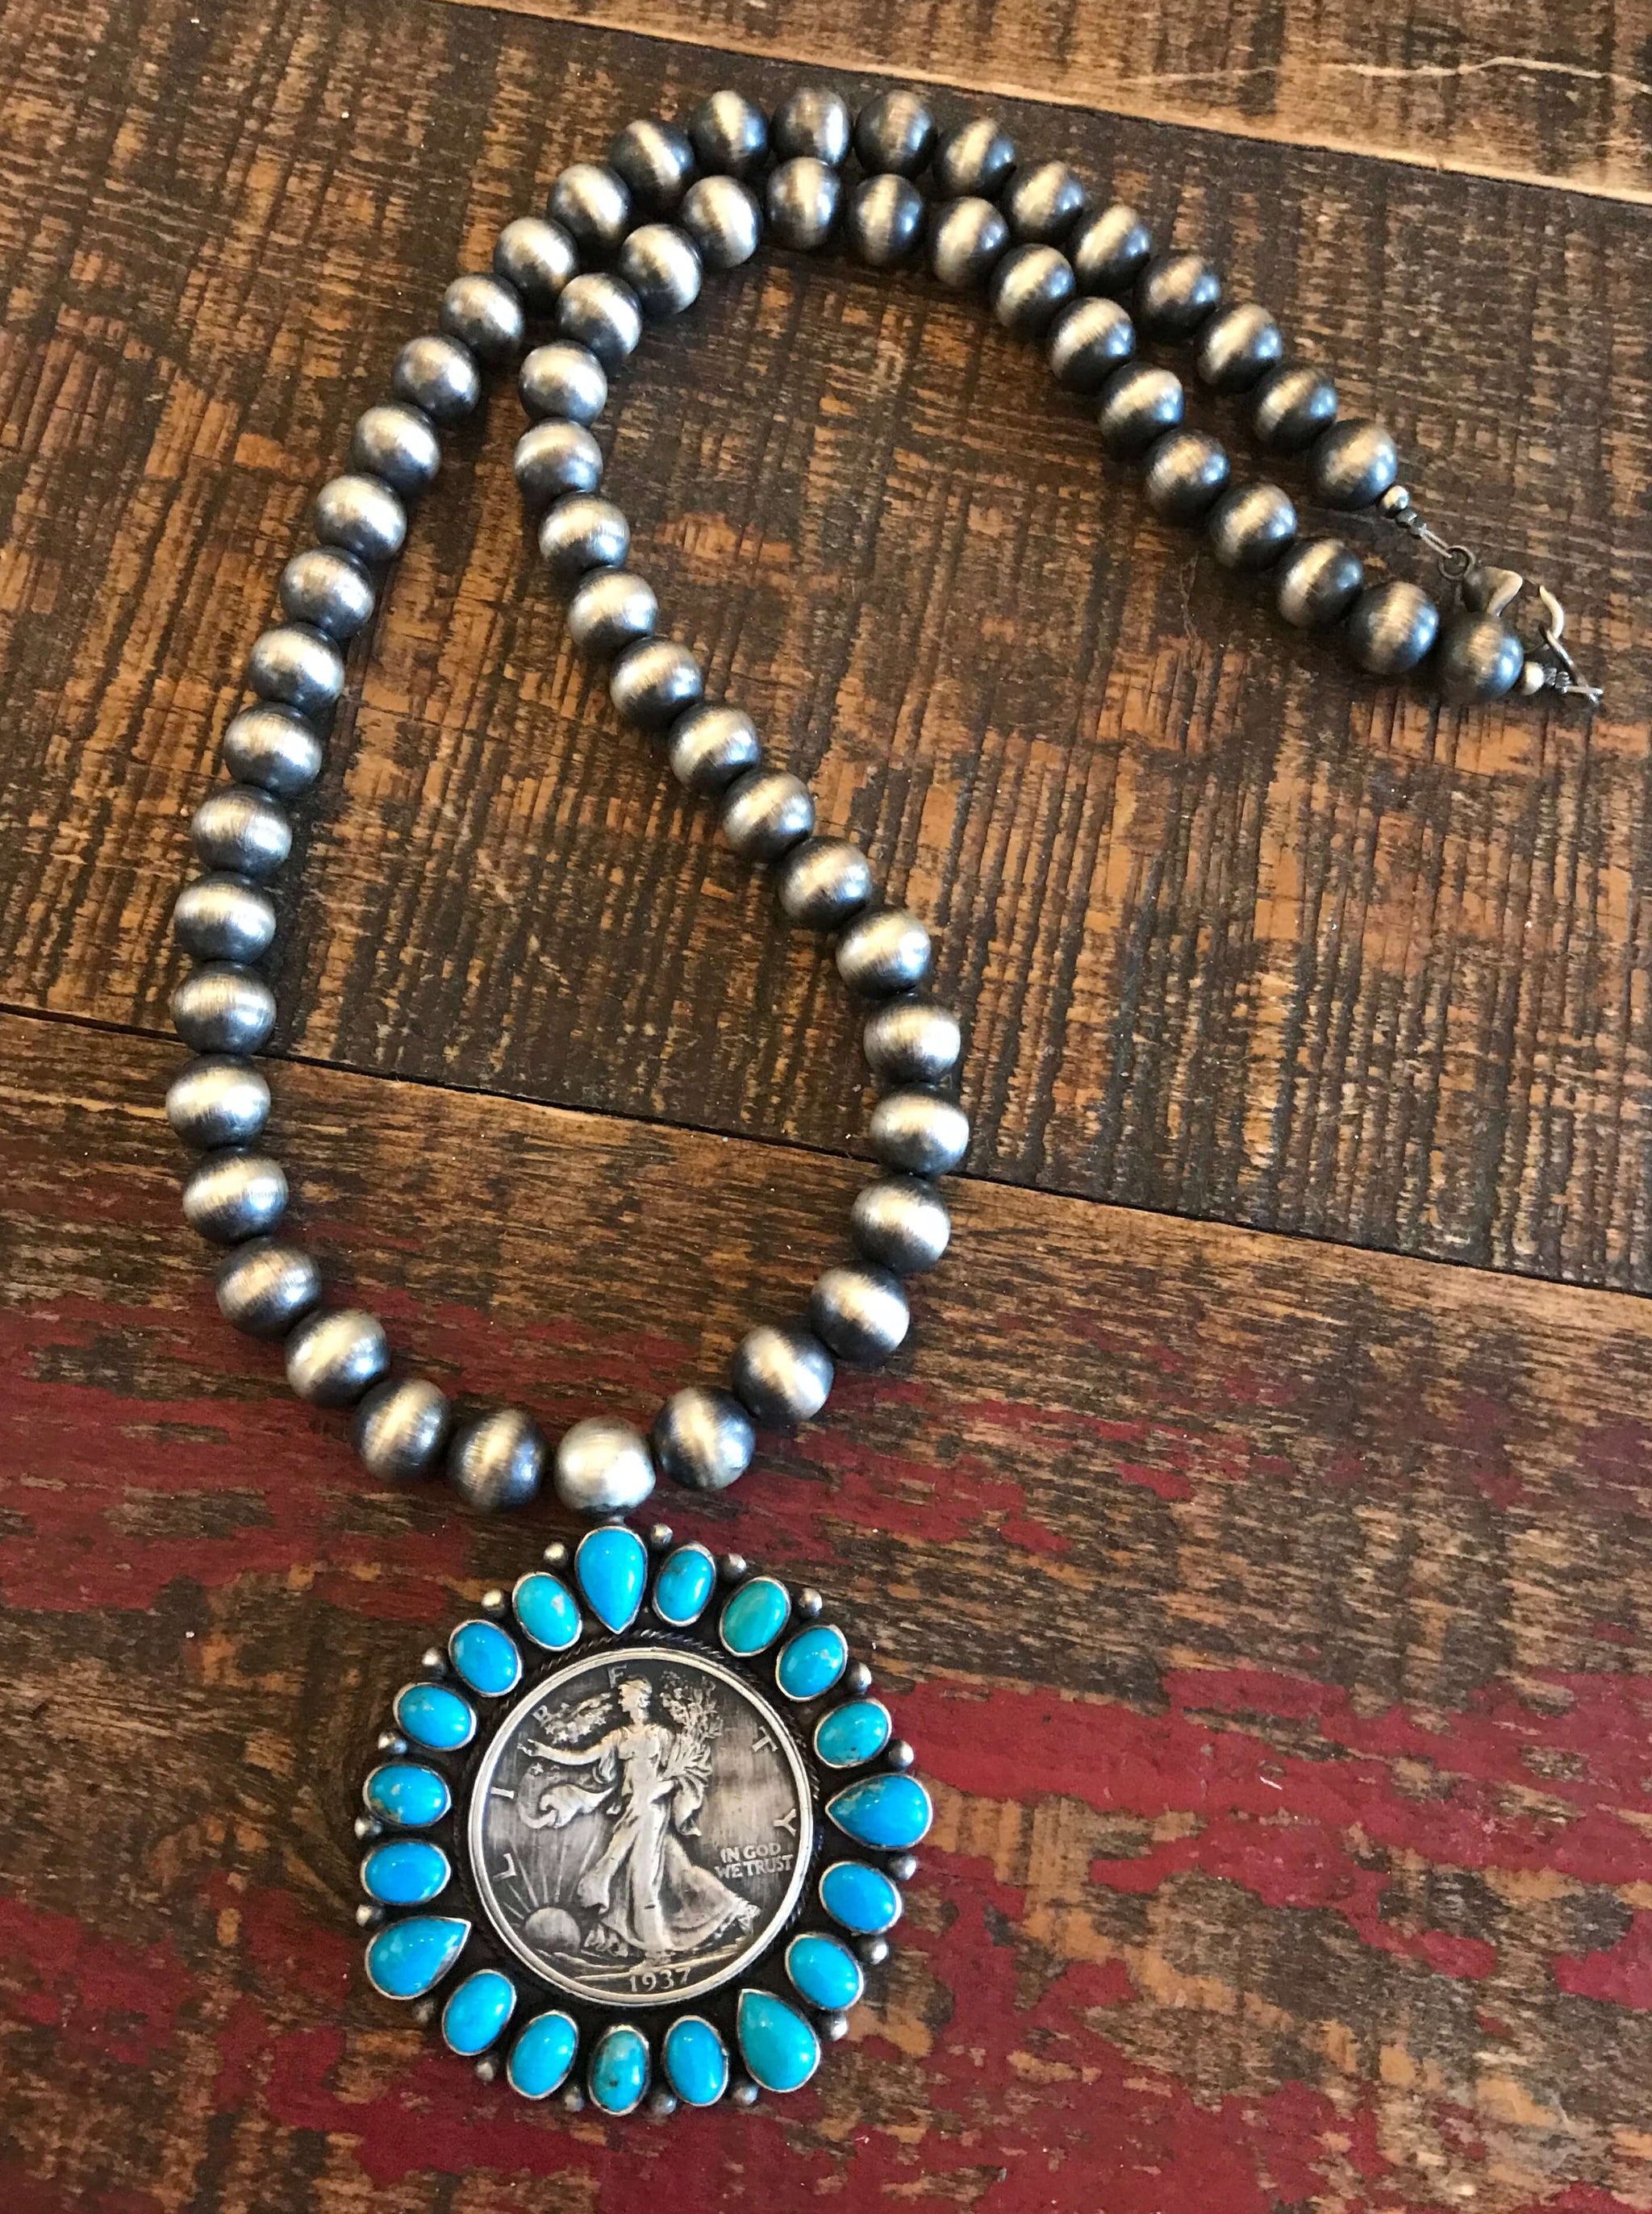 The 1937 Turquoise Coin Necklace